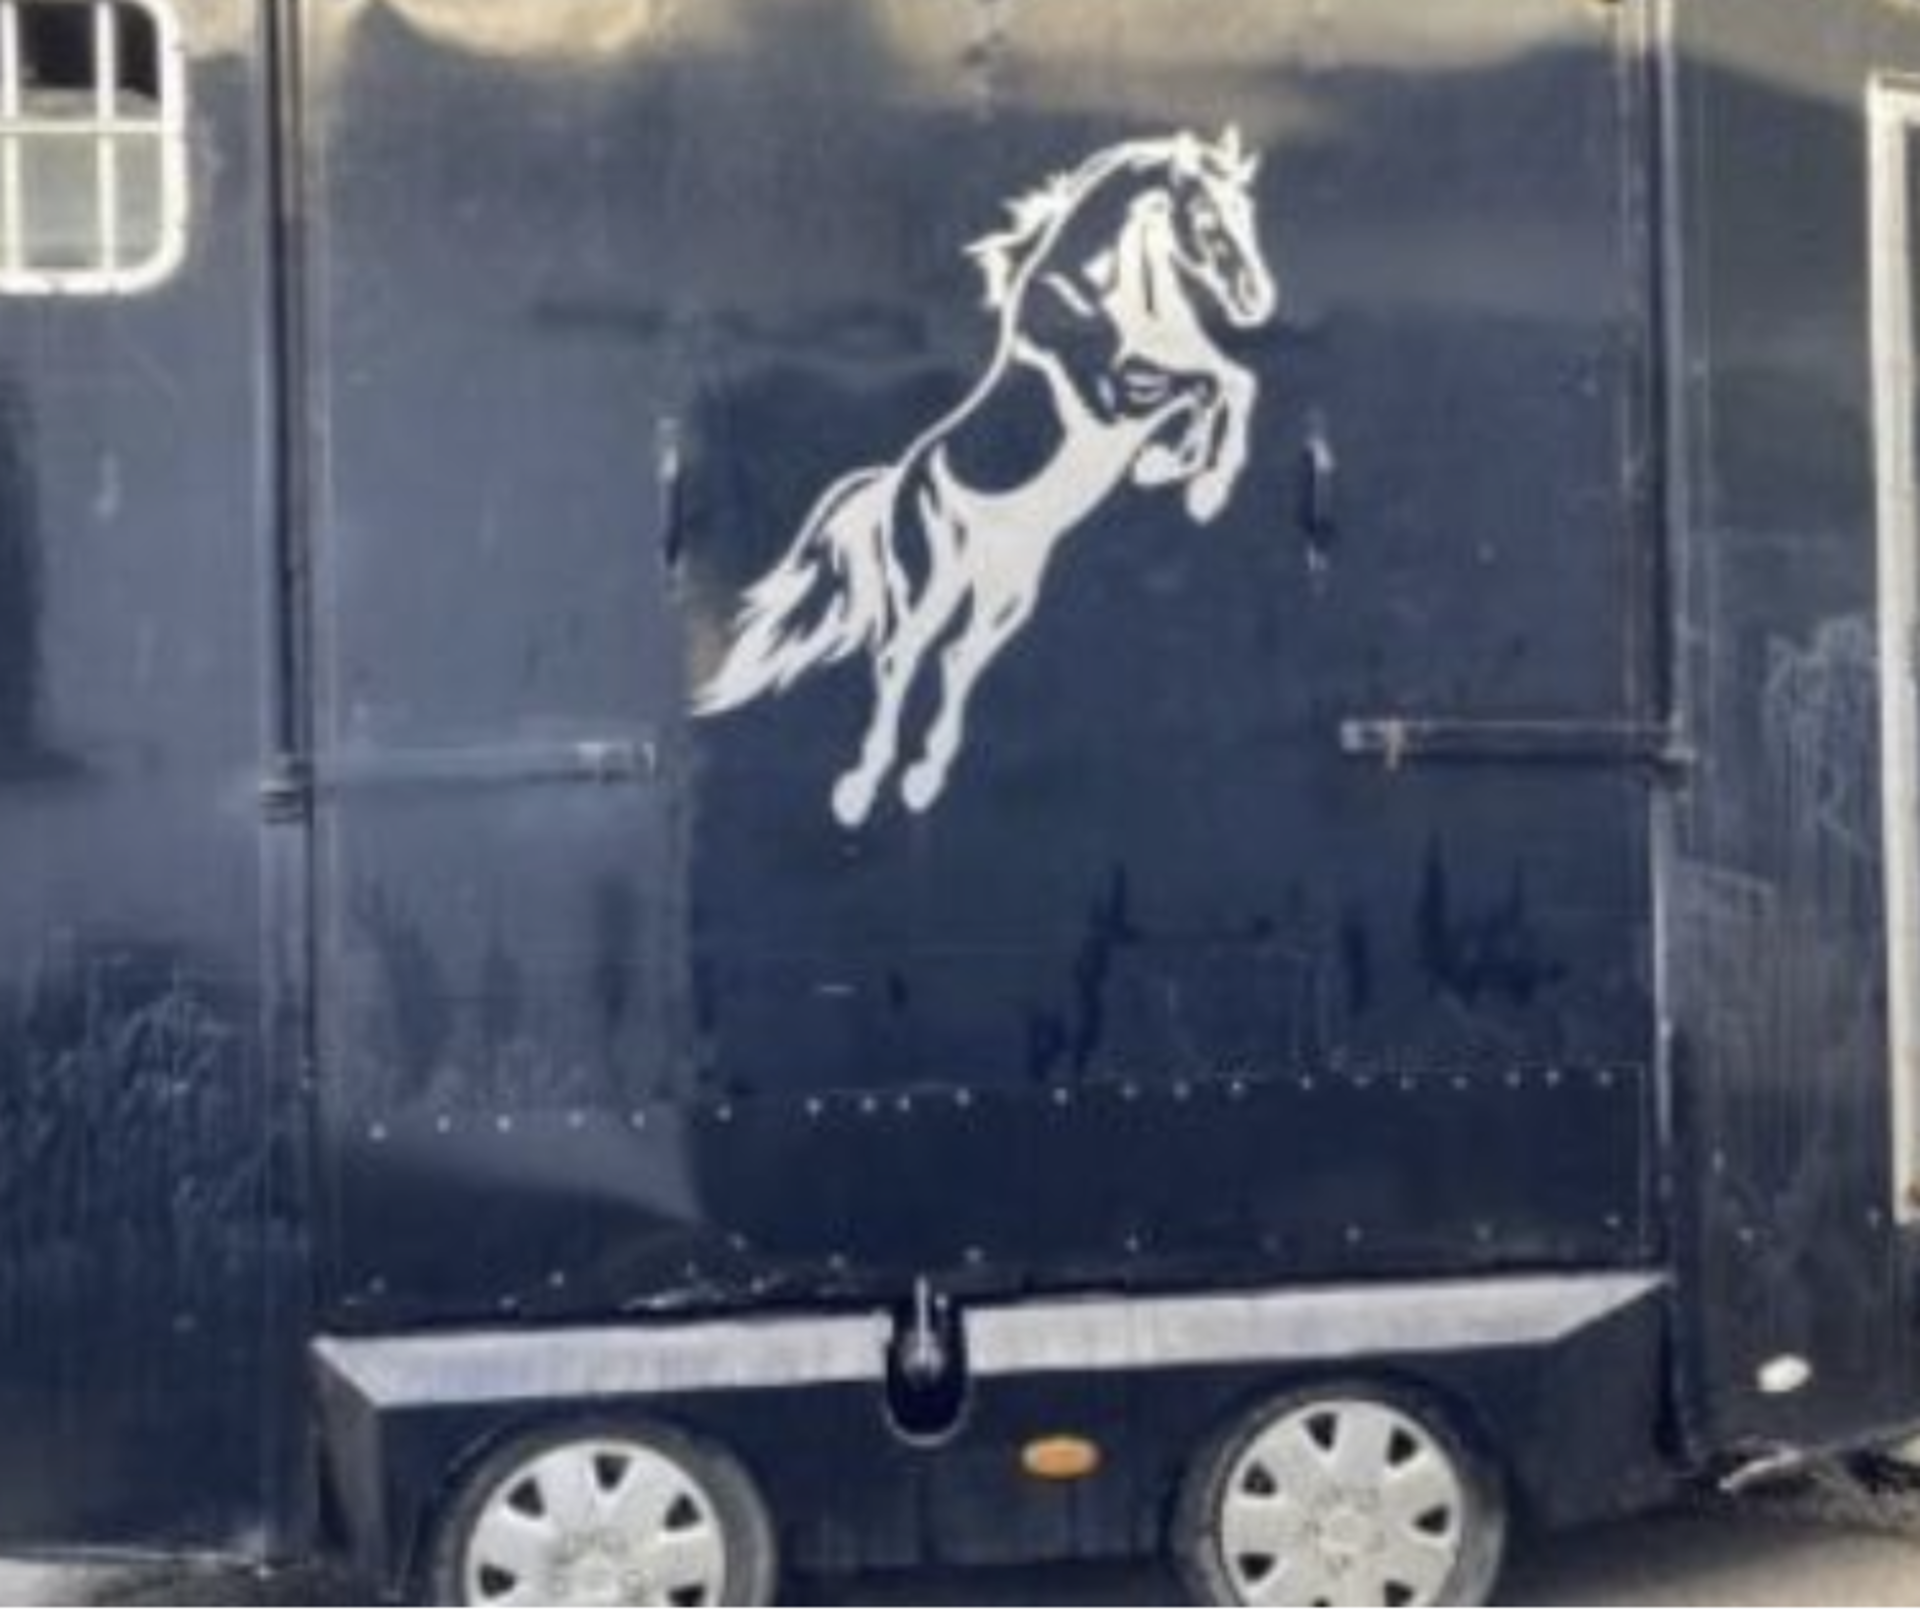 EQUITREK 2 HORSEBOX WITH DAY LIVING PARTITION.LOCATION NORTHERN IRELAND. - Image 2 of 9